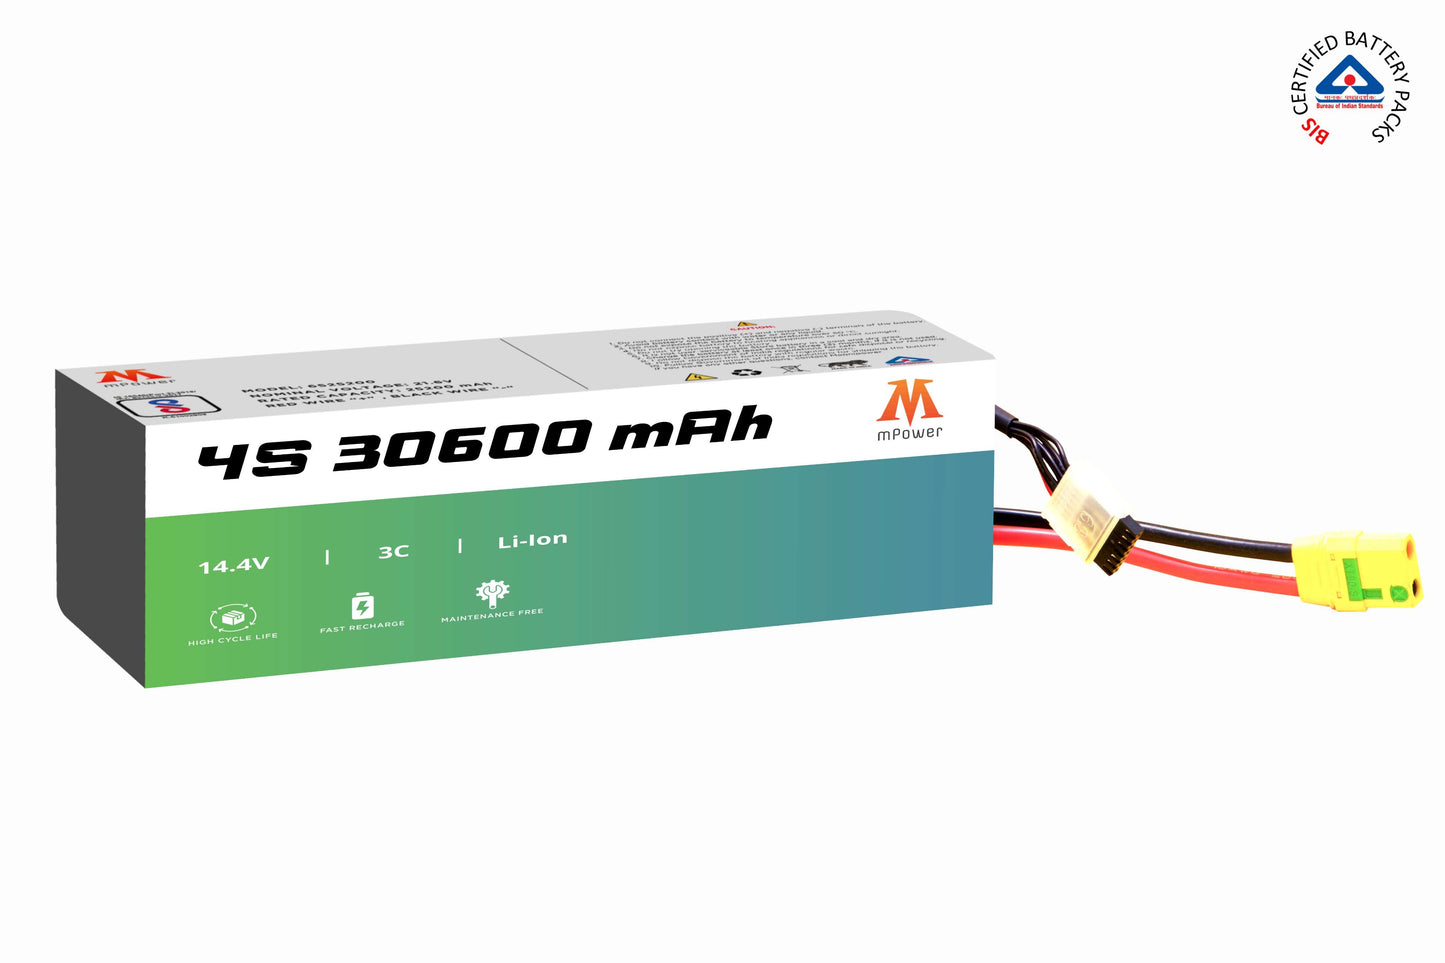 mPower 4S 30600mAh Lithium-Ion Battery for Survey Drones